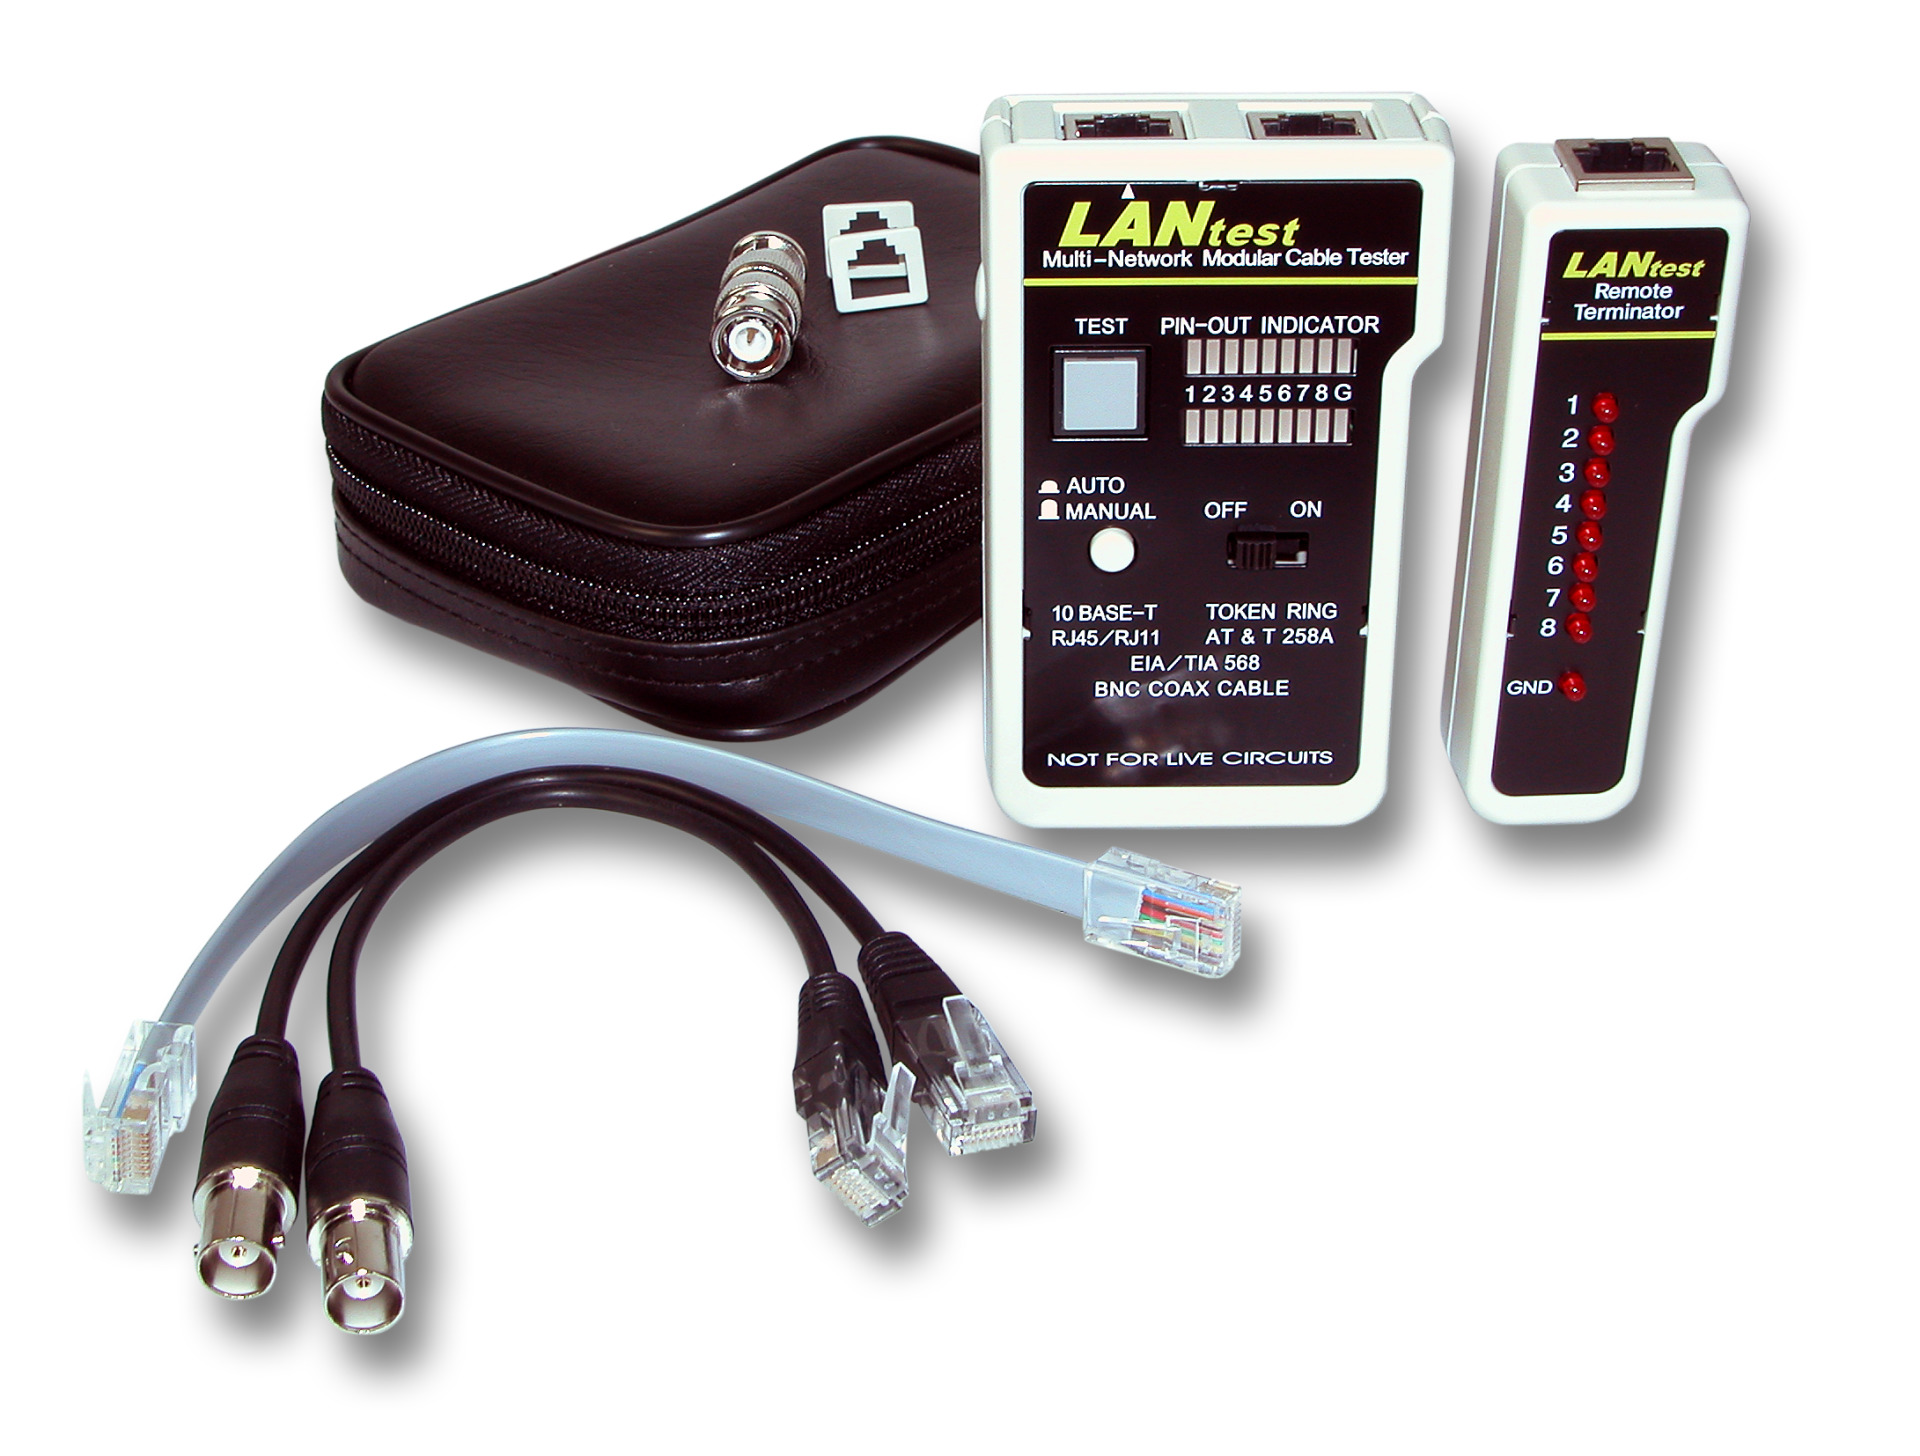 Lan test kit, network and modular cable